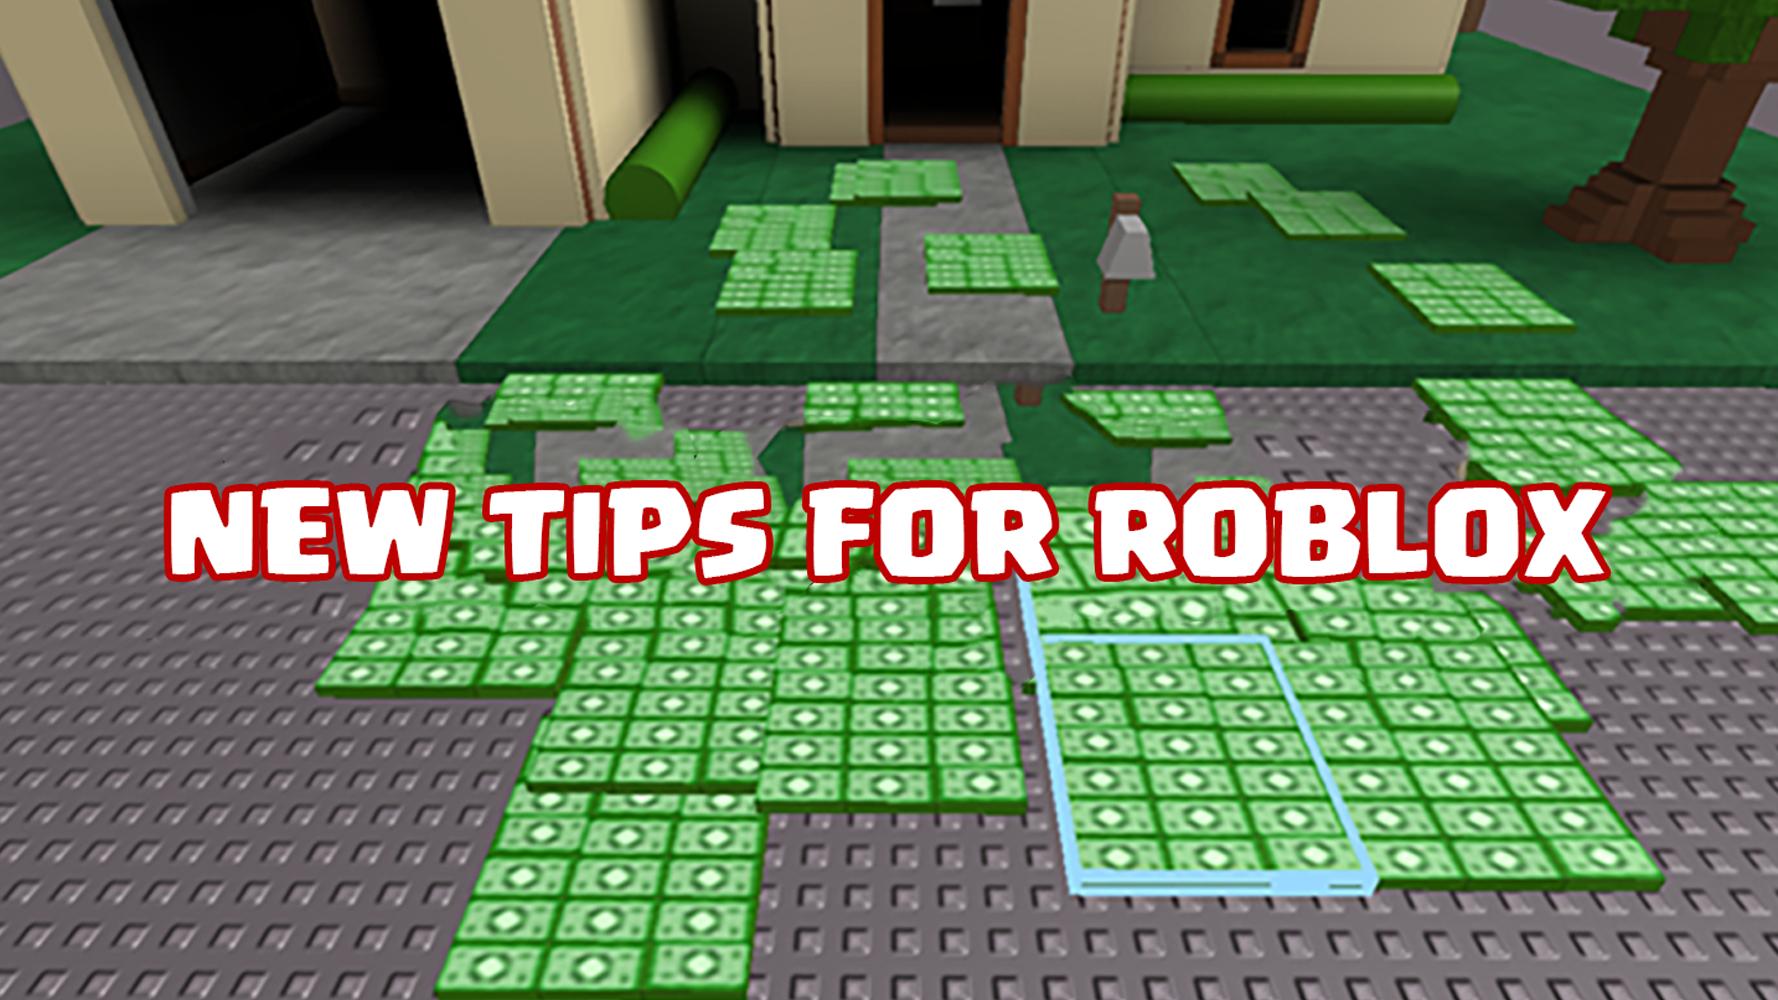 Tips Robux For Roblox 2 Games For Android Apk Download - tips of roblox 2 game 10 apk download android books roblox robux